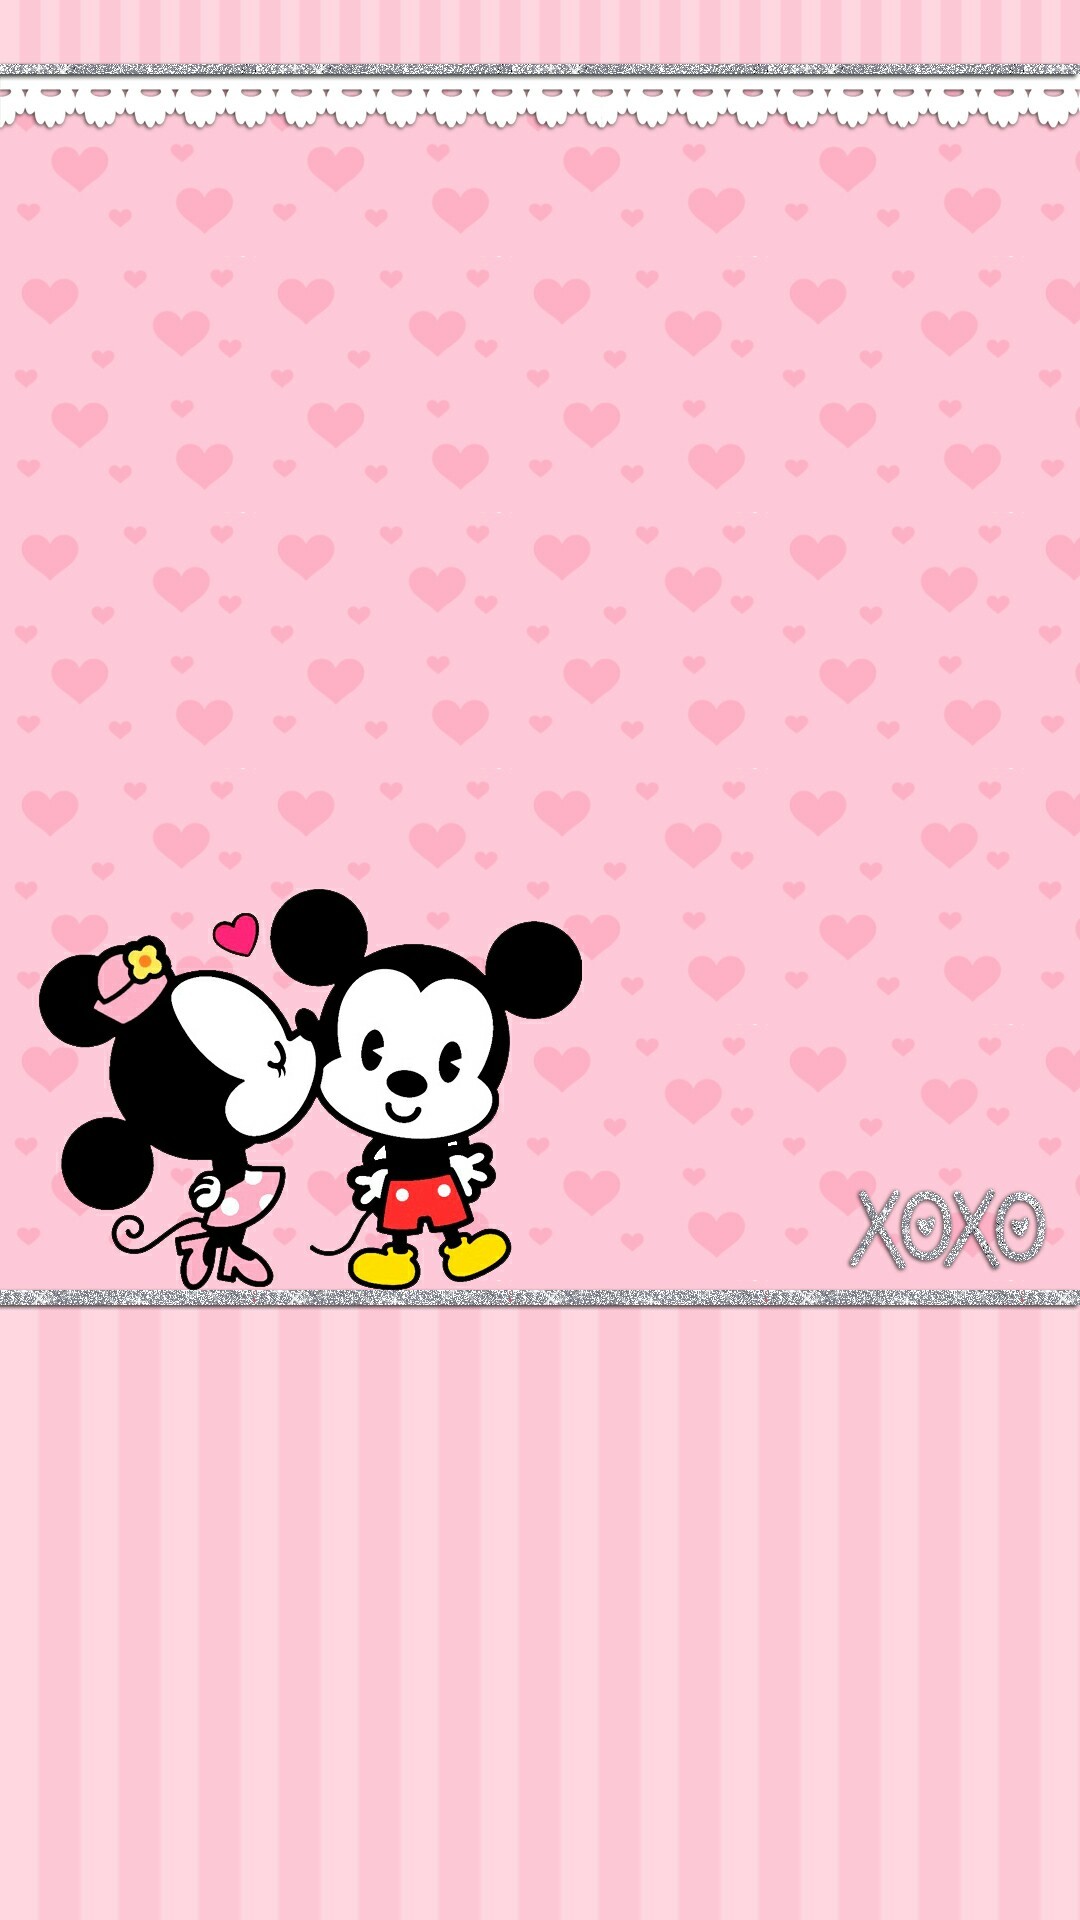 minnie mouse wallpaper for android,cartoon,pink,design,pattern,illustration